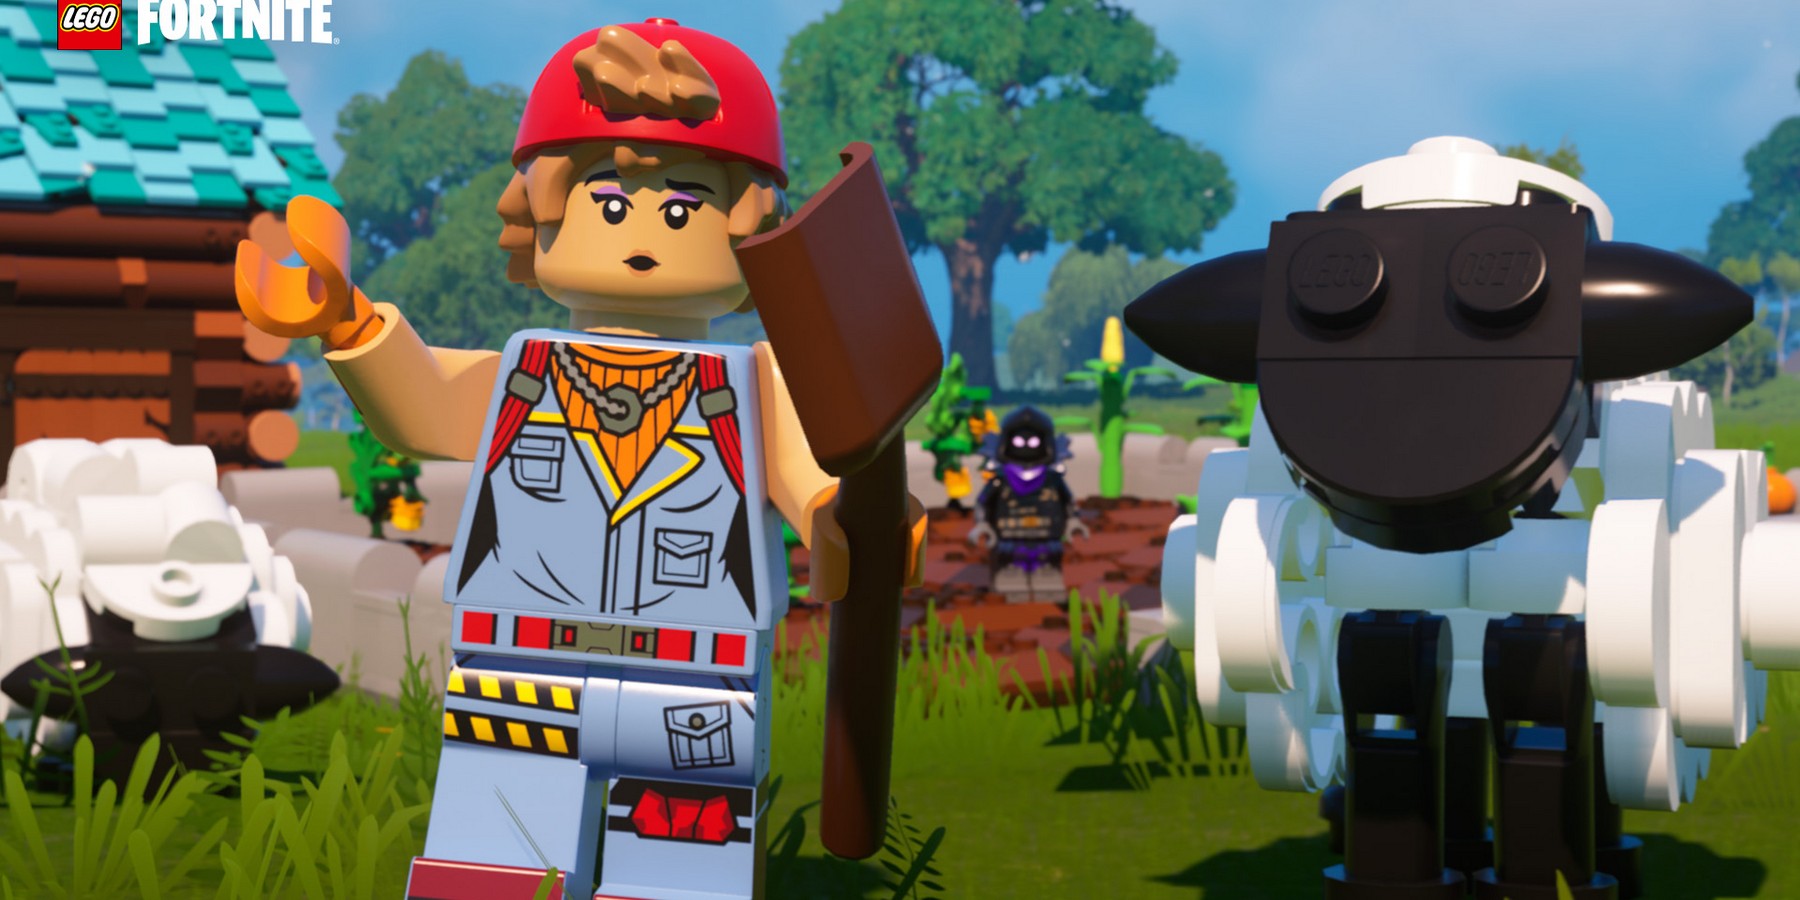 How to Get Heavy Wool in LEGO Fortnite